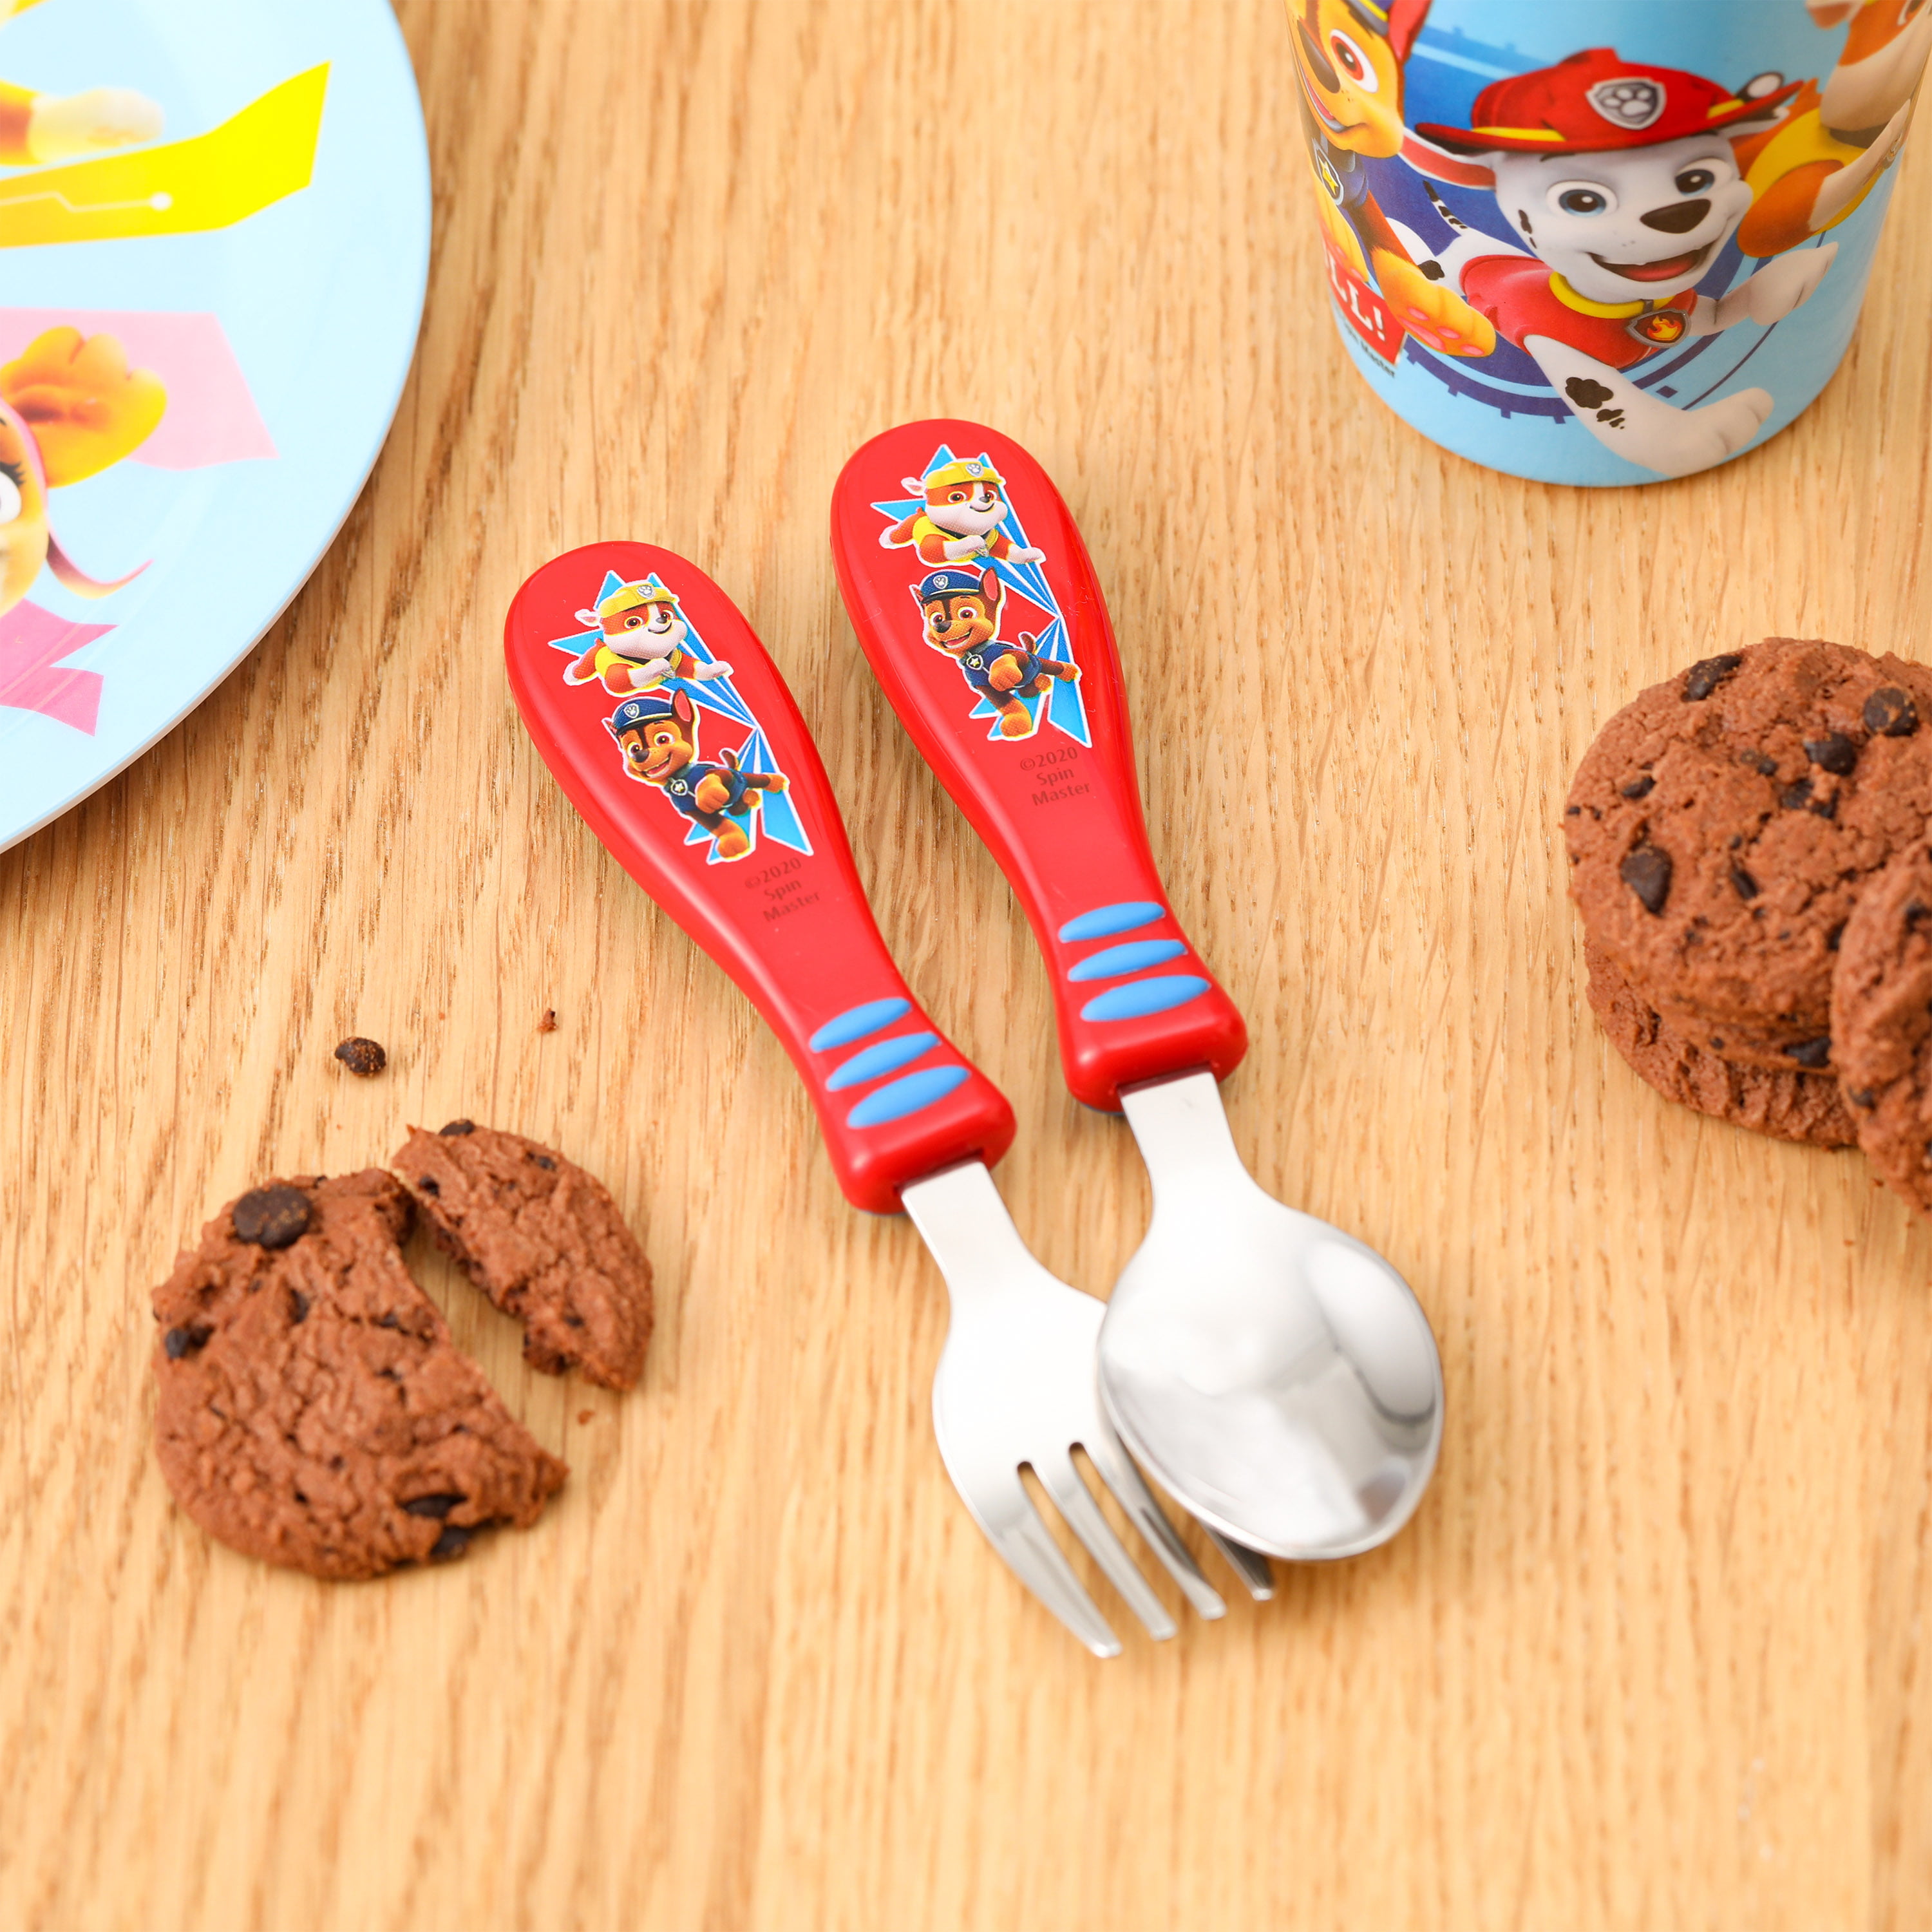 Zak Designs PAW Patrol Chase and Rubble Easy-Grip Flatware with